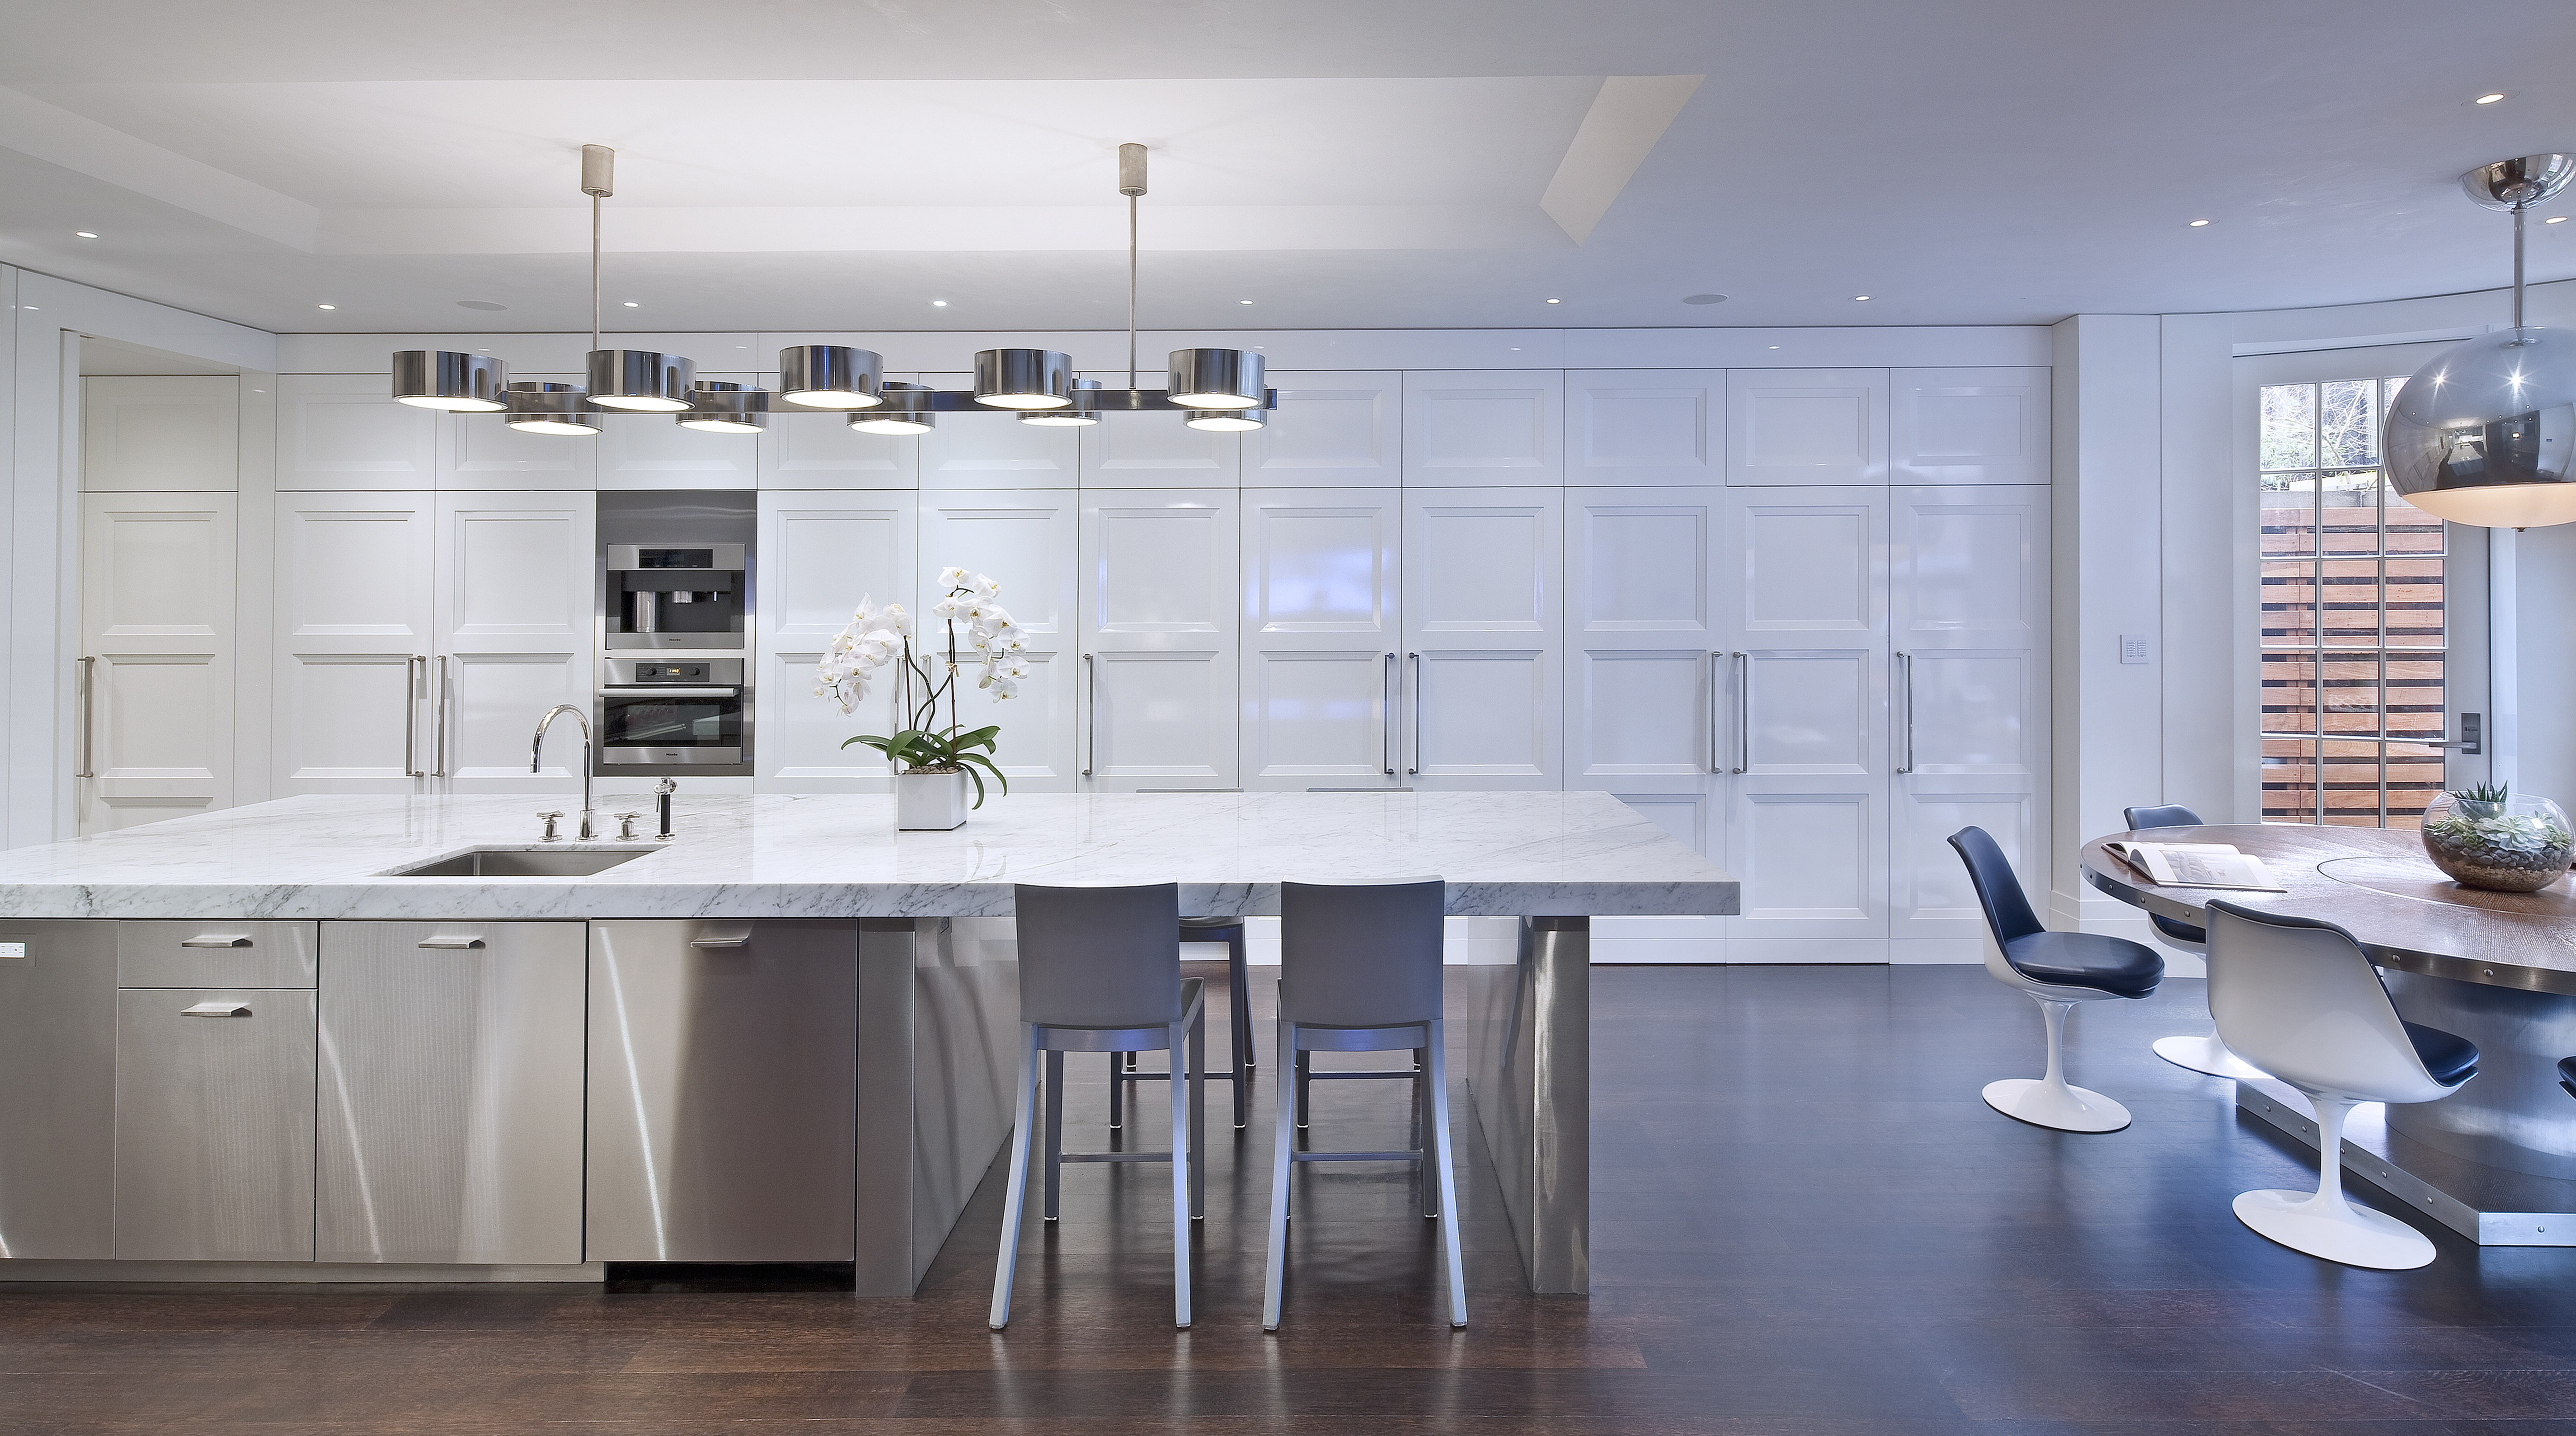 6 Clever Kitchen Design Ideas from St. Charles of New York